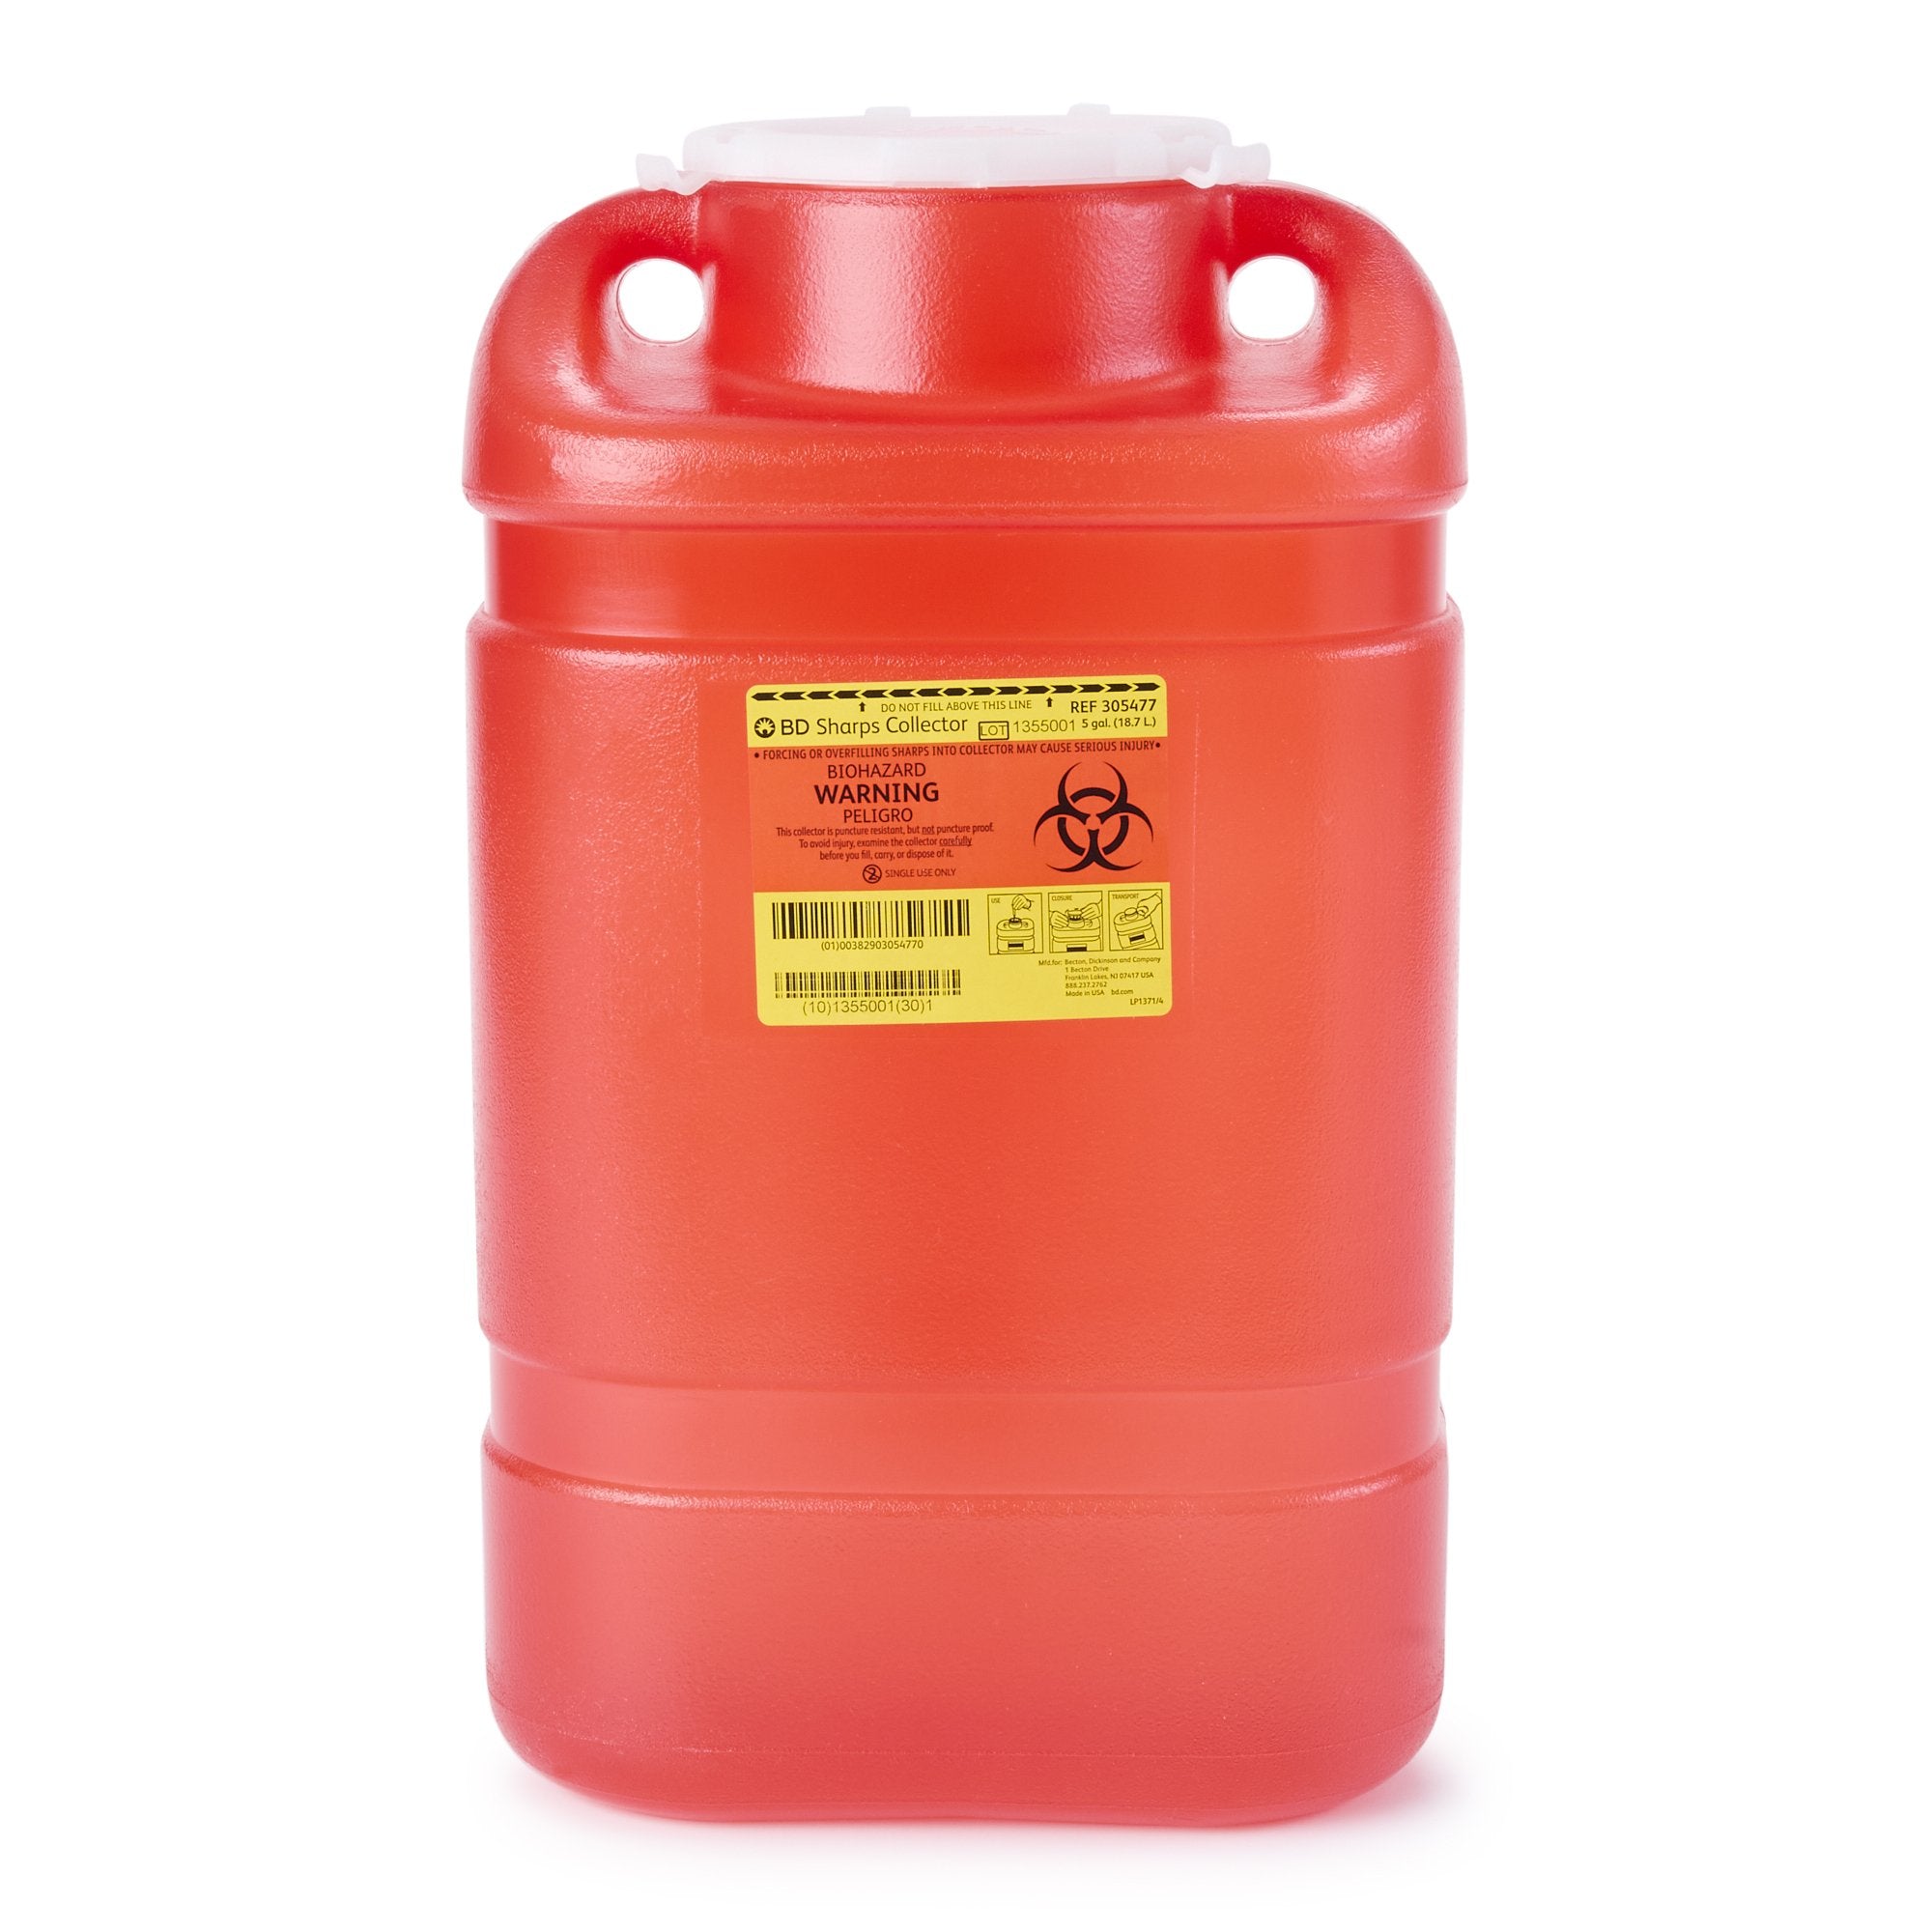 Sharps Container BD Red Base 18 H X 7-1/2 W X 10-1/2 D Inch Vertical Entry 5 Gallon